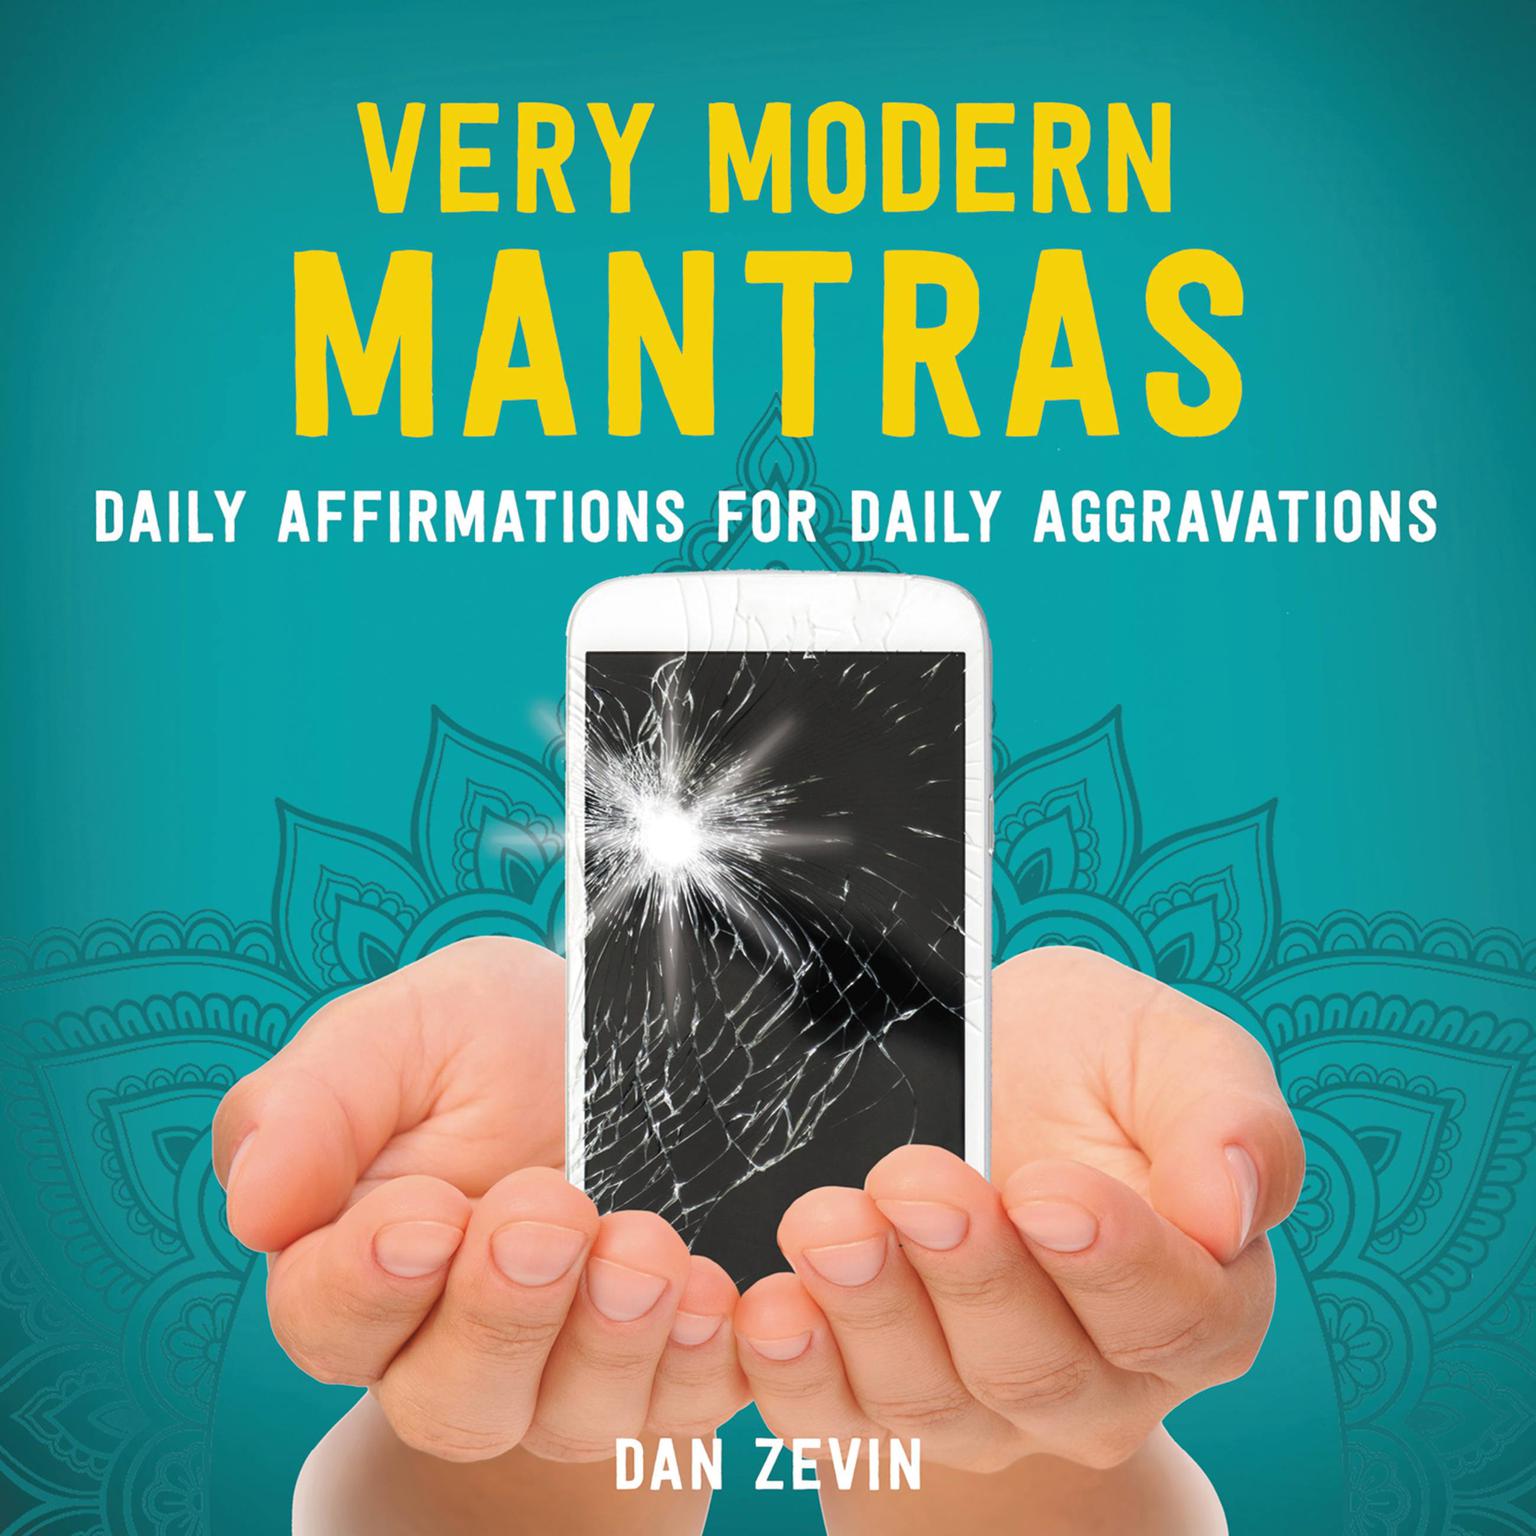 Very Modern Mantras: Daily Affirmations for Daily Aggravations Audiobook, by Dan Zevin